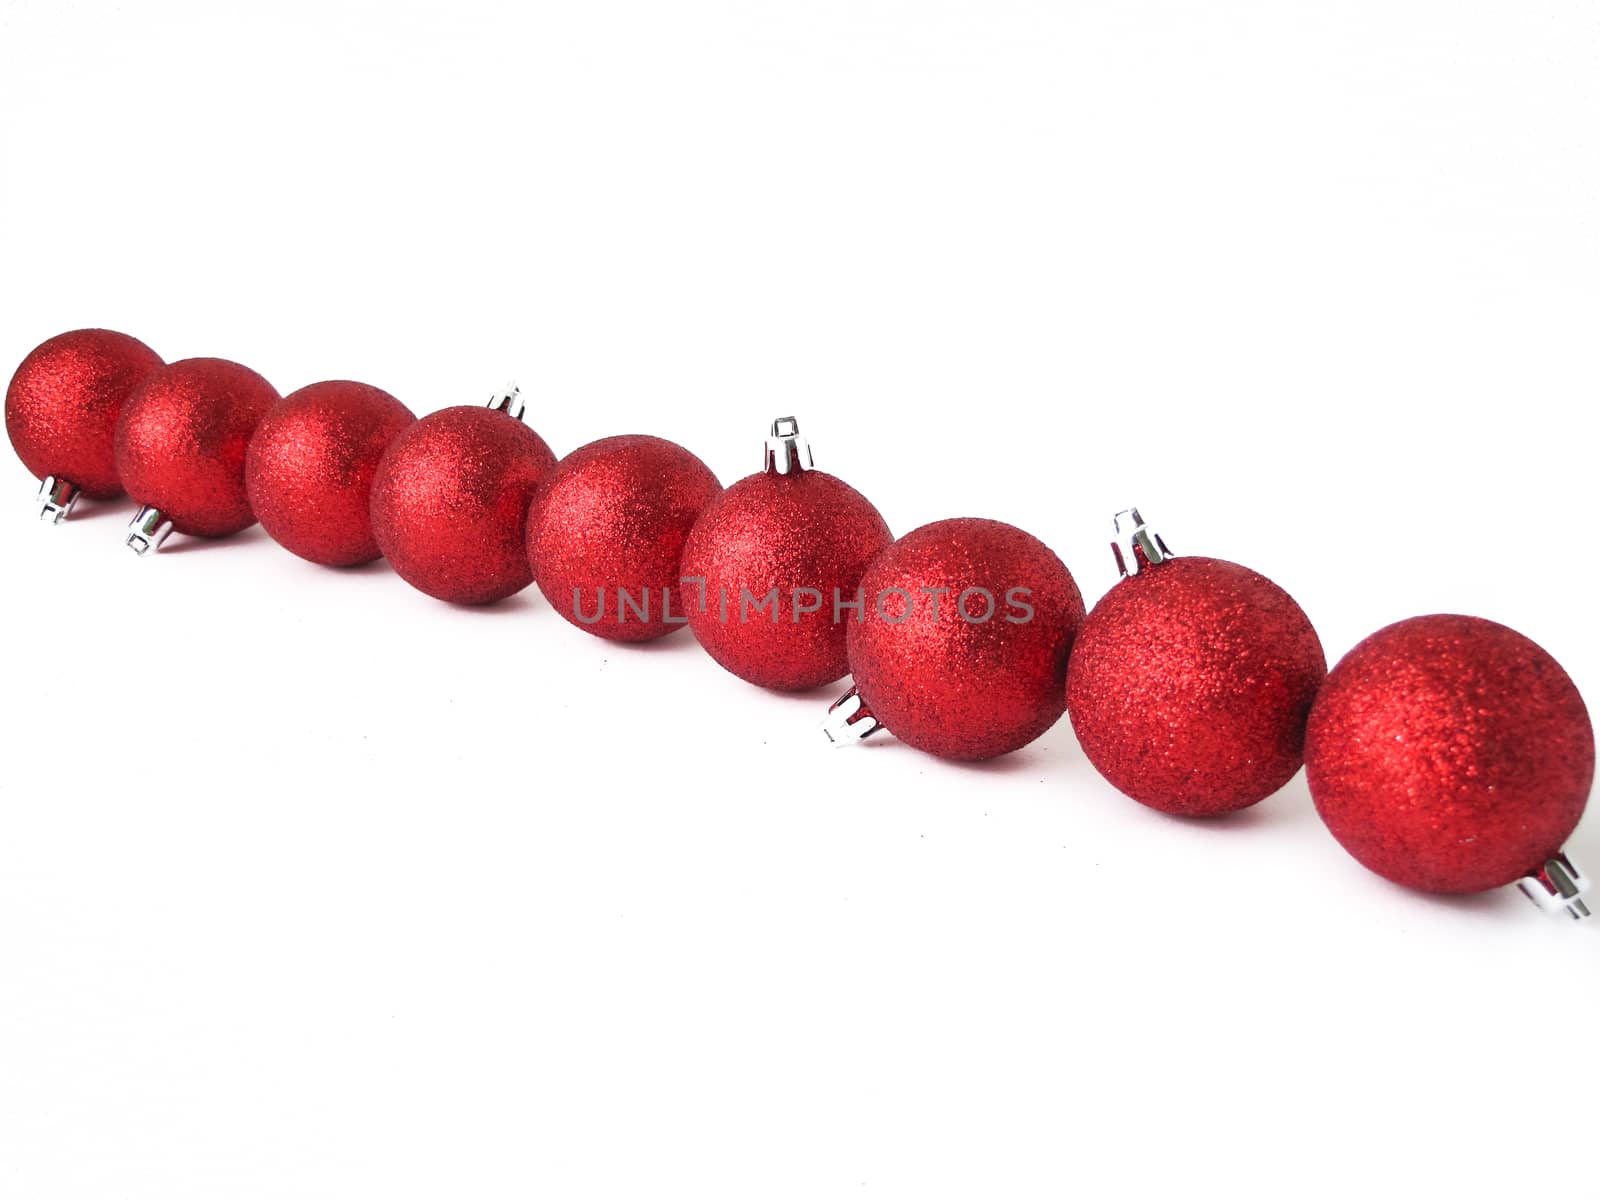 Christmas balls on white background located in one row